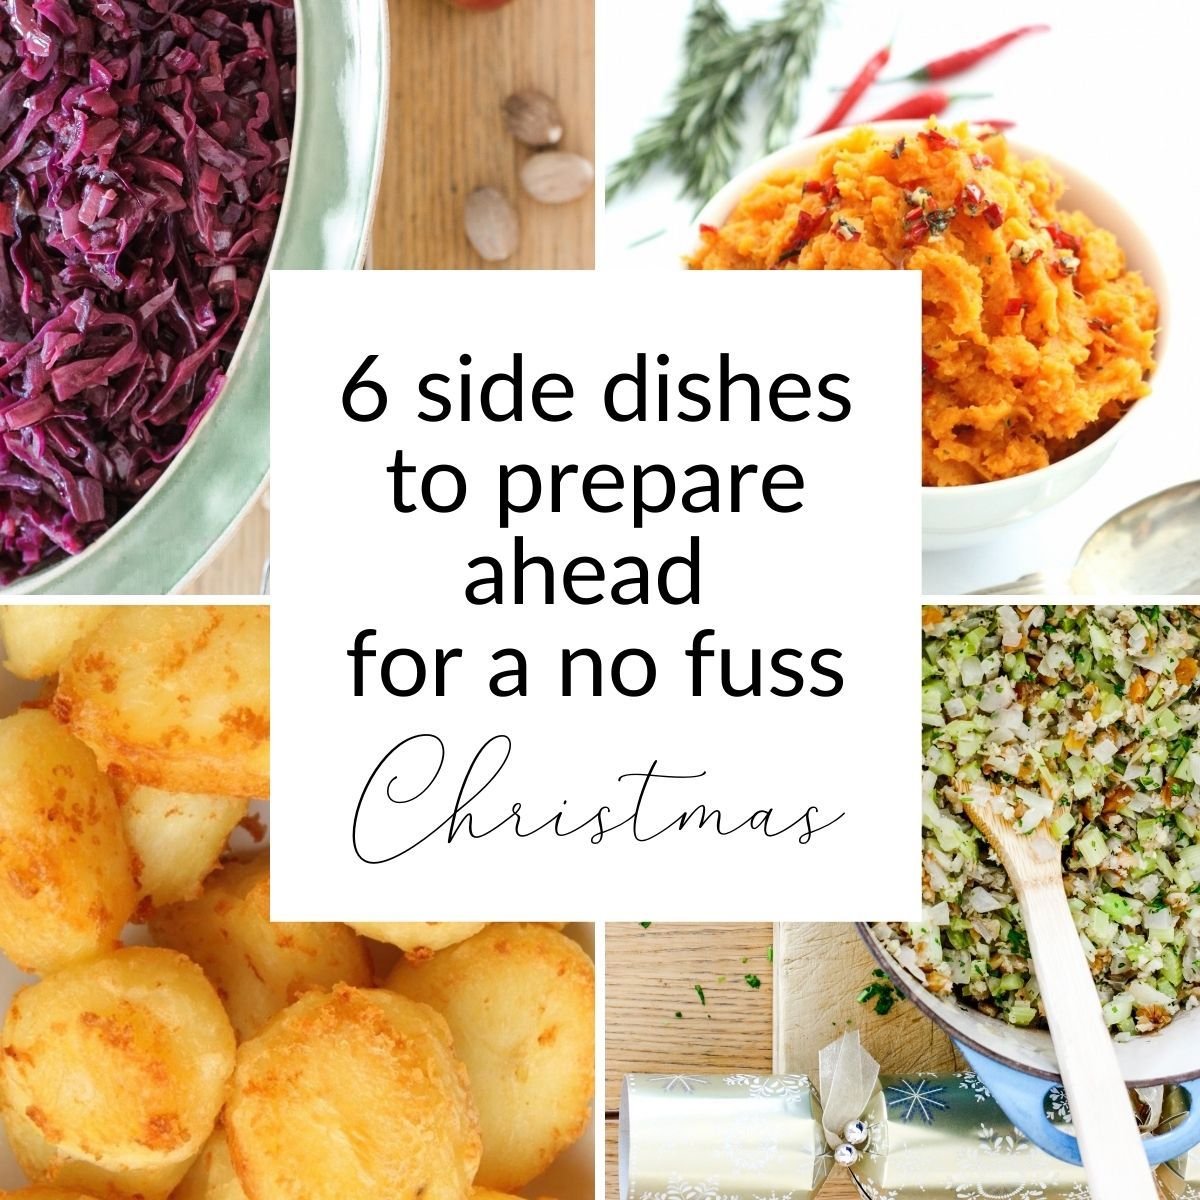 6 side dishes to prepare ahead for a no fuss Christmas